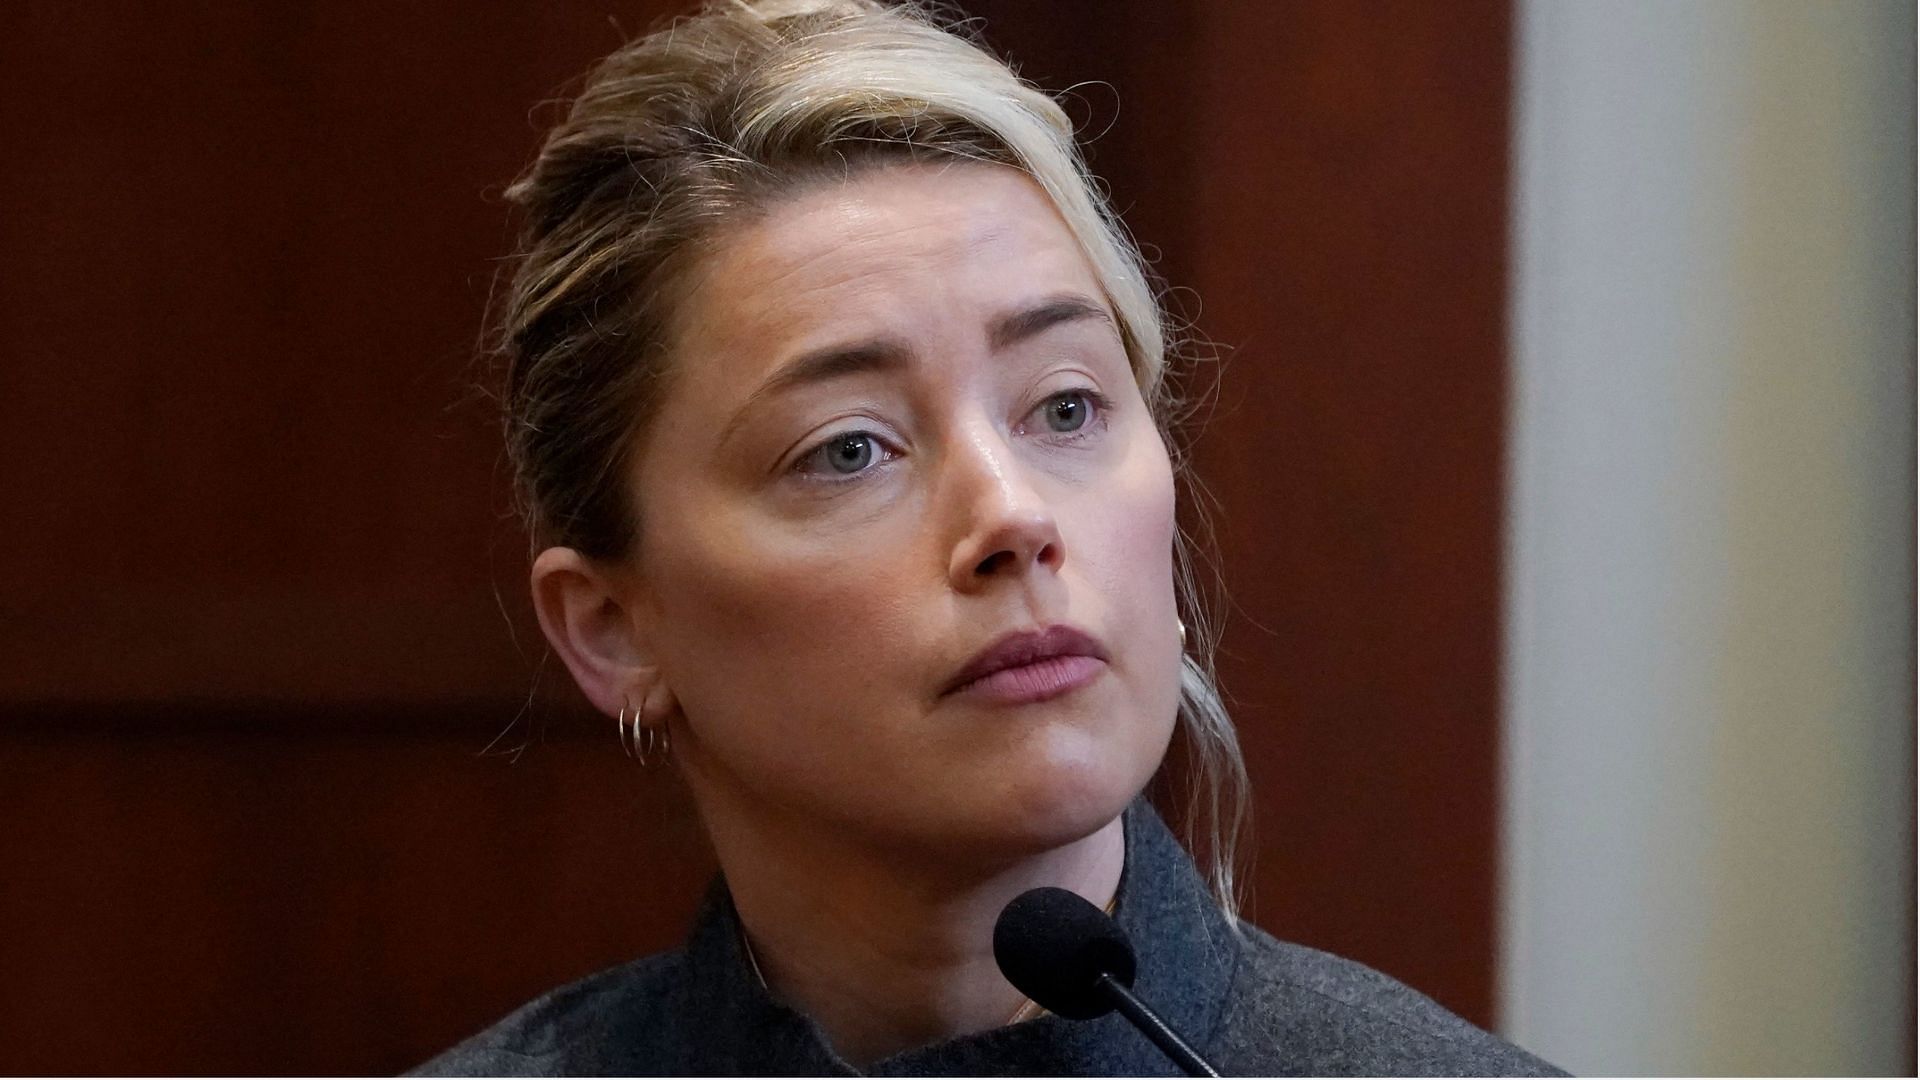 Amber Heard made her first appearance in an exclusive interview with NBC, days after the verdict of her high-profile defamation trial was announced on June 1. (Image via Getty Images/Steve Helber)